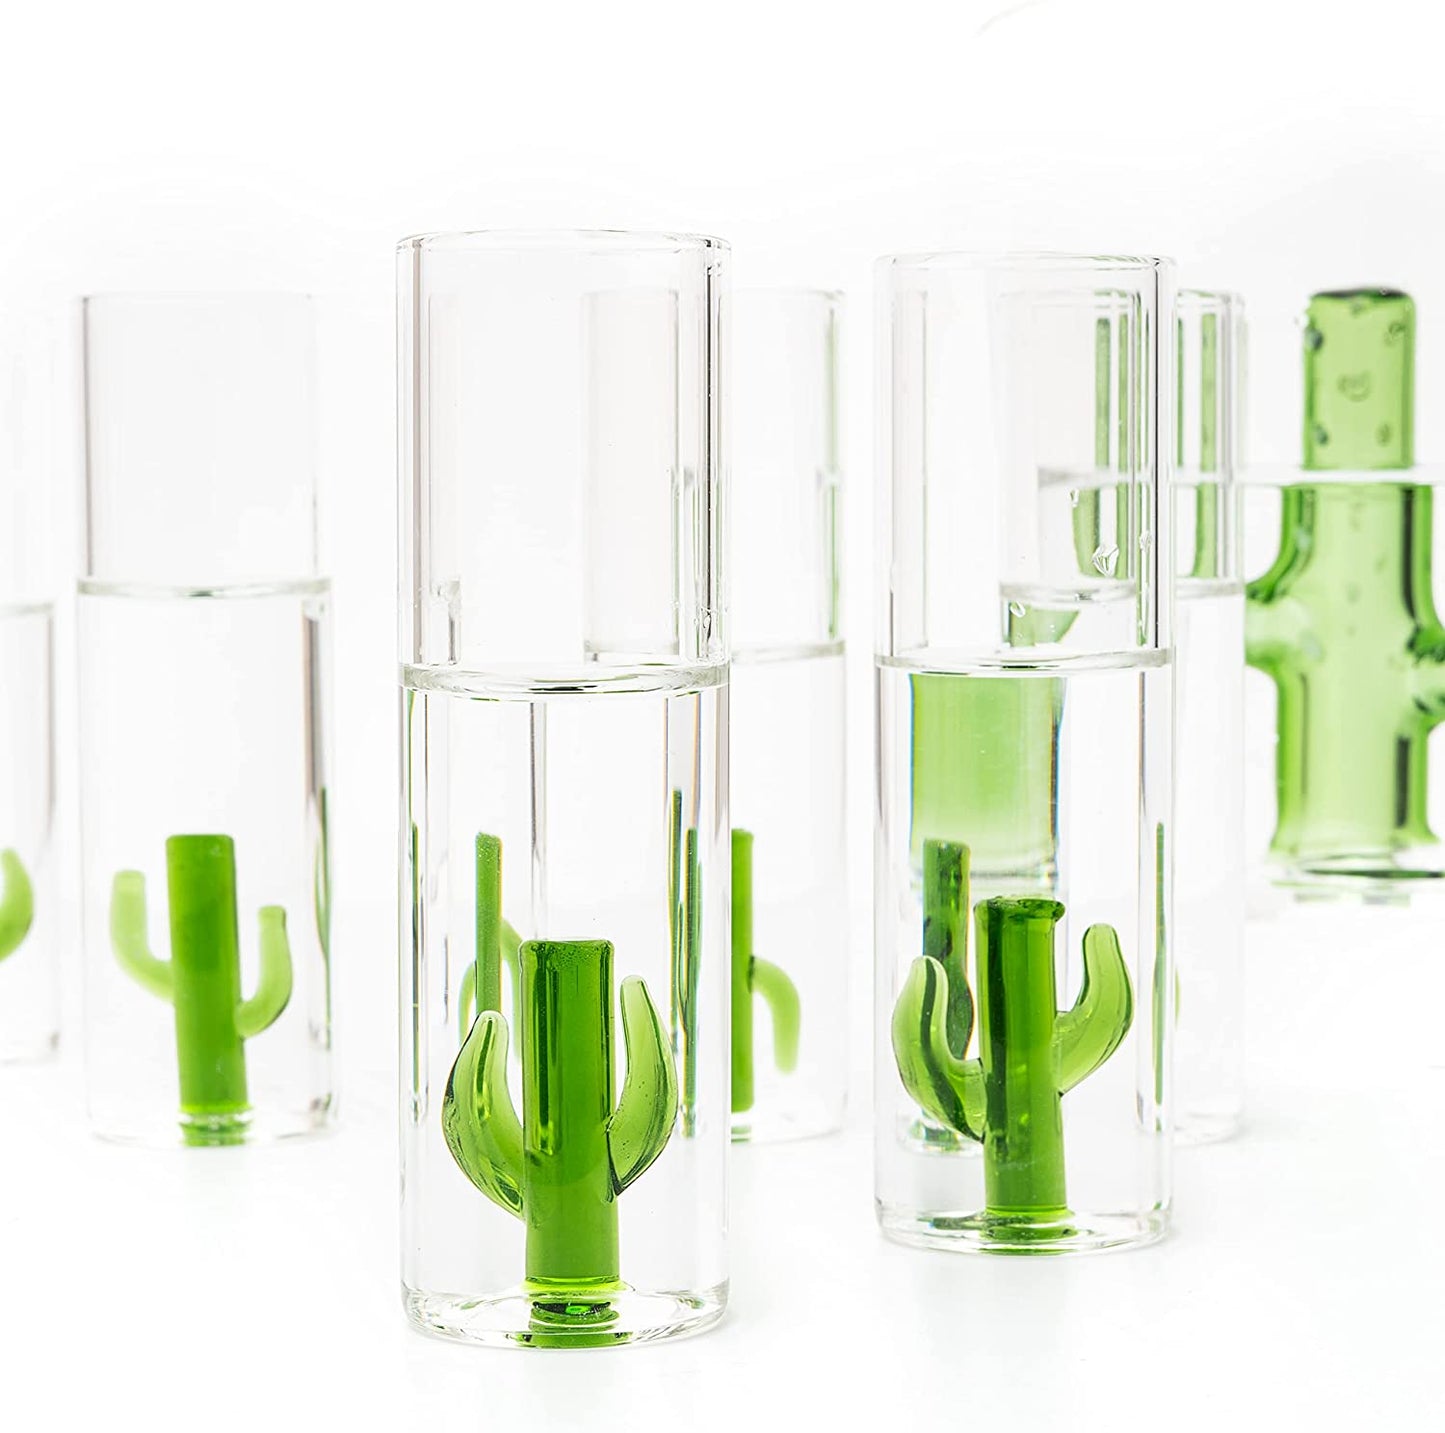 The Wine Savant - Cactus Tequila Set - Agave Decanter - 6 Agave Shot Glasses - Perfect Gift For Any Bar - 25oz Bottle, 3oz Glasses